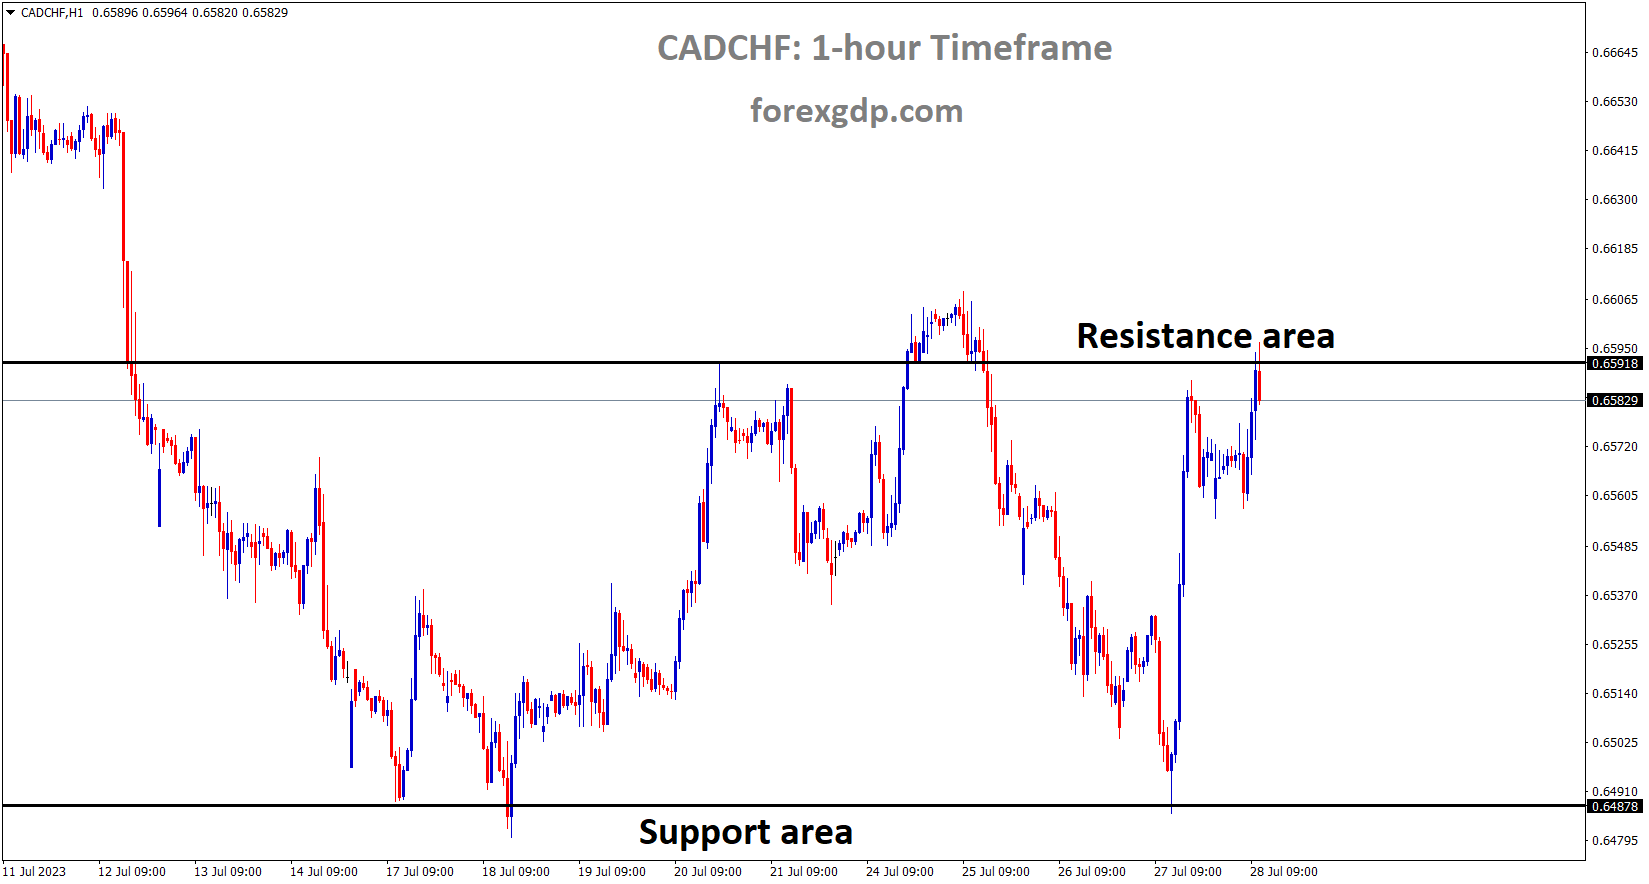 CADCHF is moving in the Box pattern and the market has reached the resistance area of the pattern